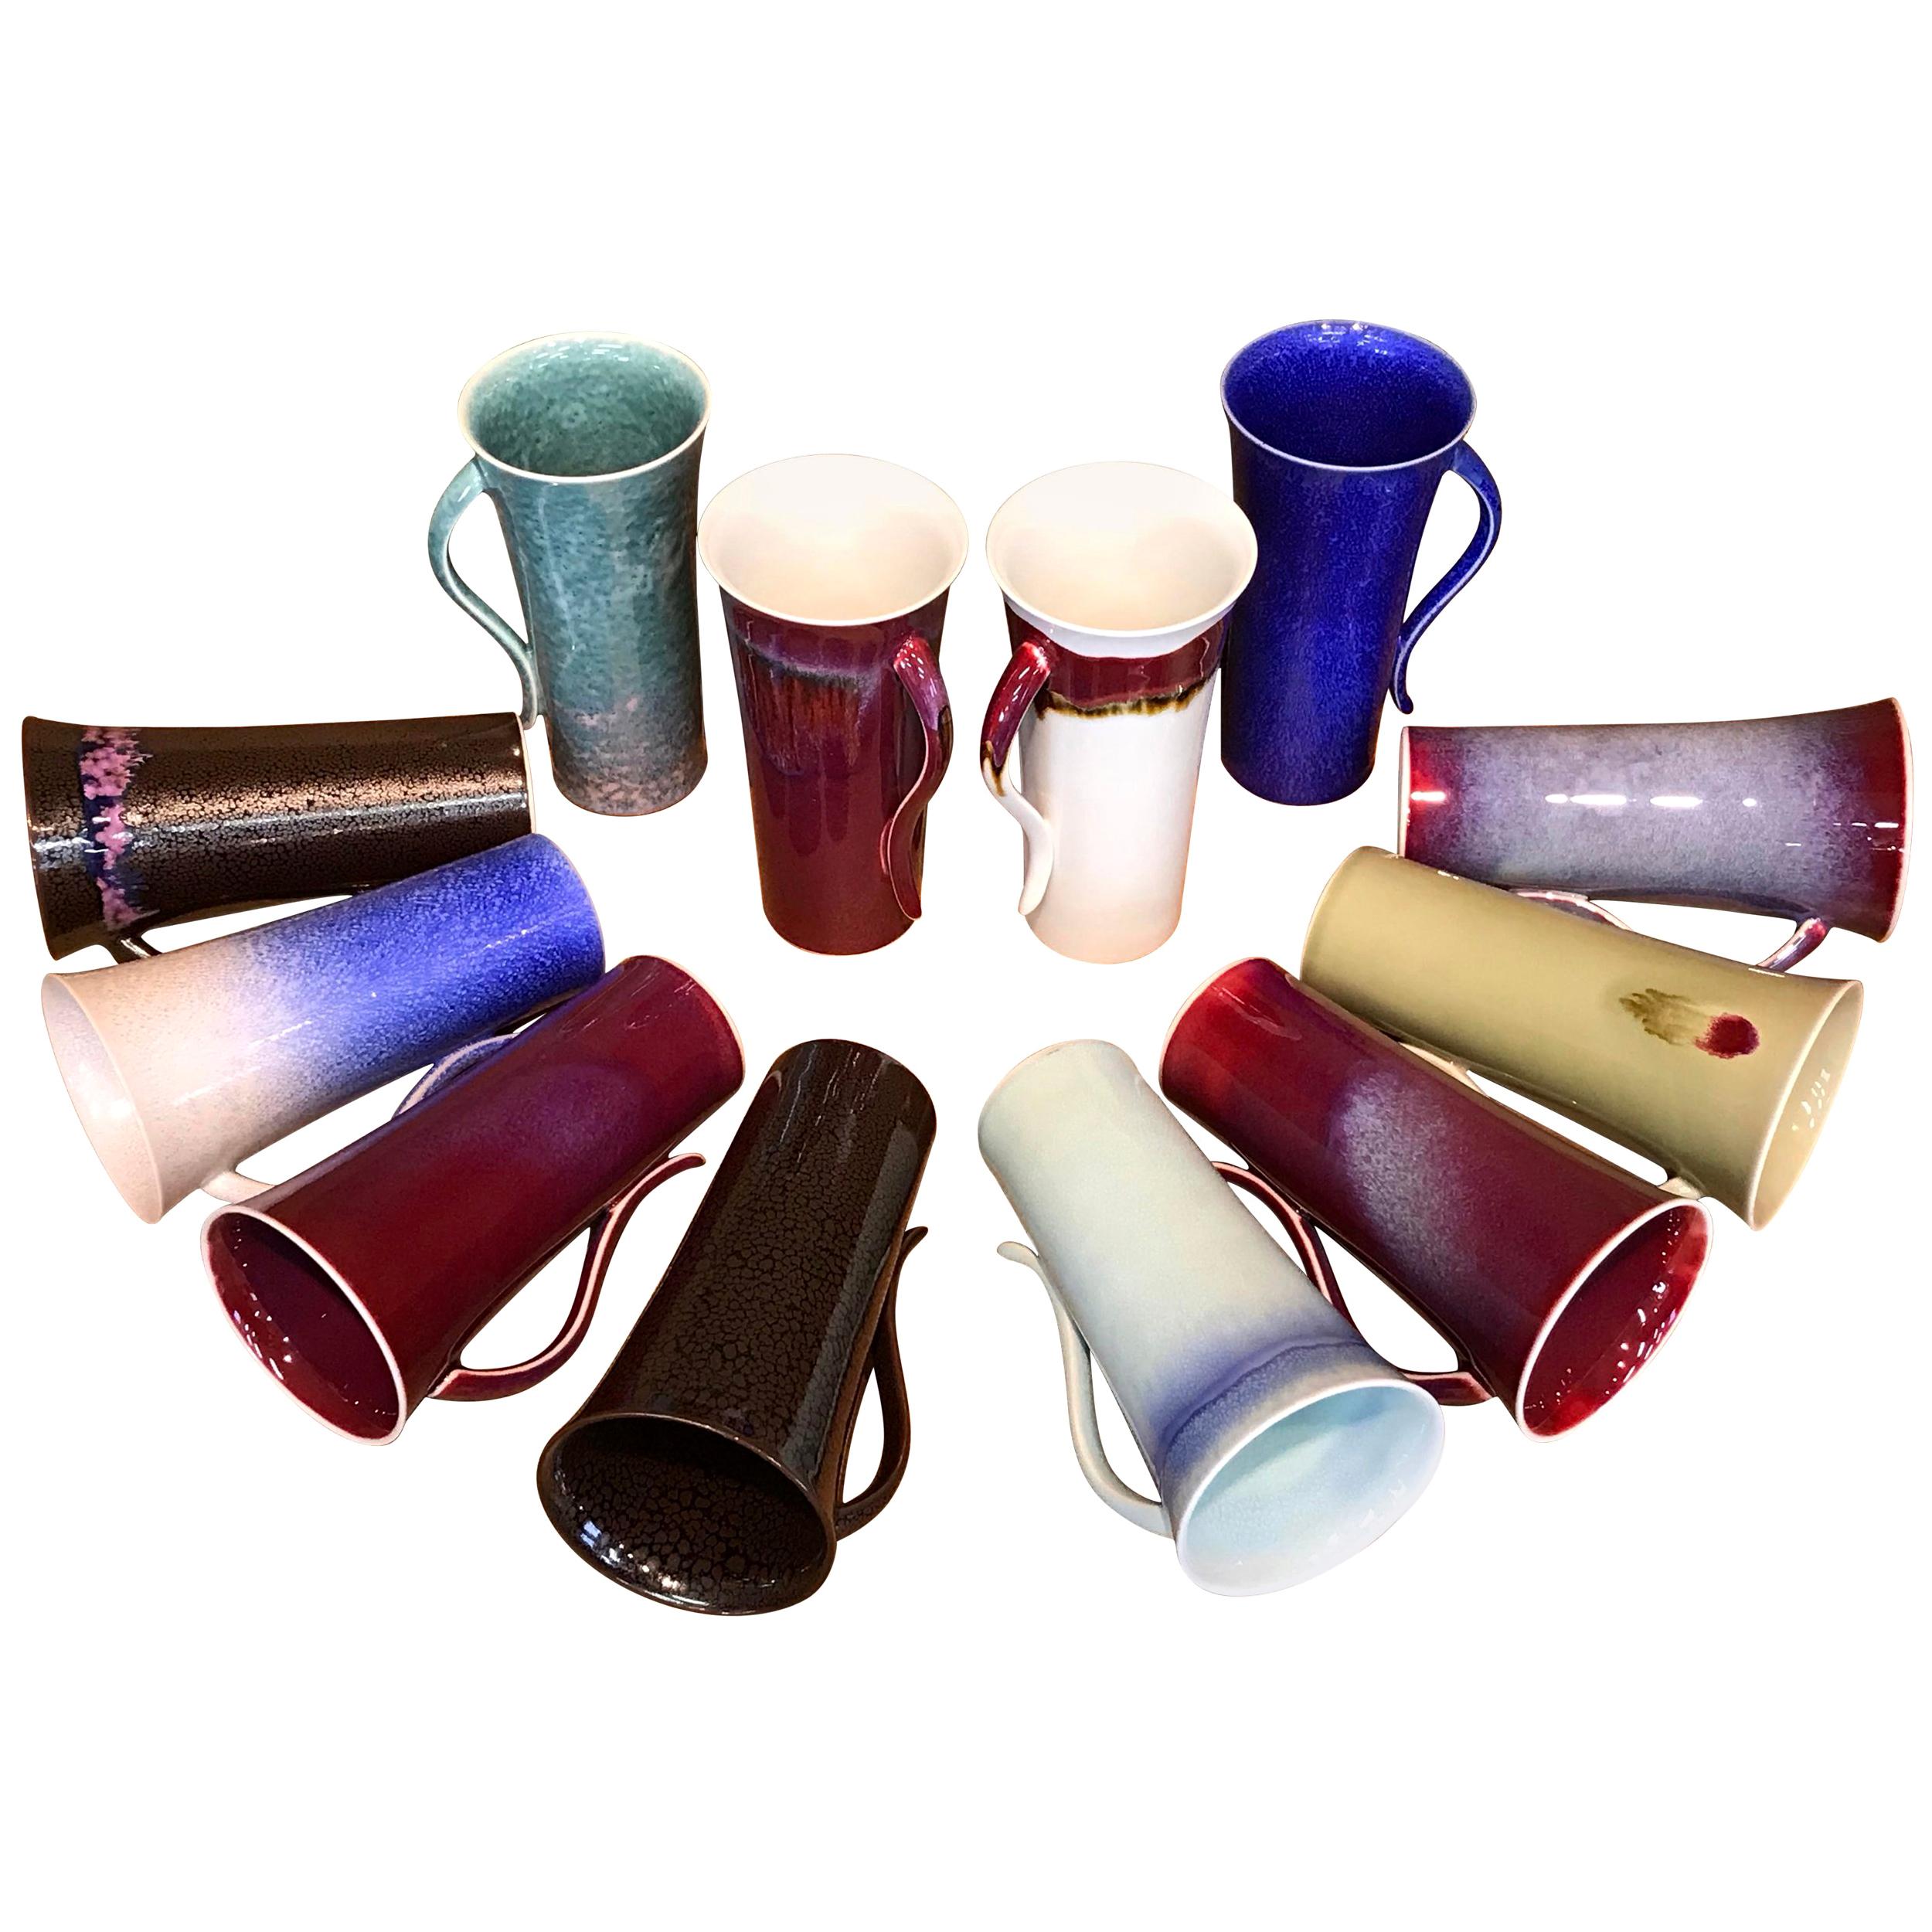 Striking extraordinary set of 12 Japanese contemporary tall hand-glazed porcelain mugs in a beautiful shape masterfully glazed in the artist's breathtaking signature colors like wine-red, green and white, signed pieces by widely respected